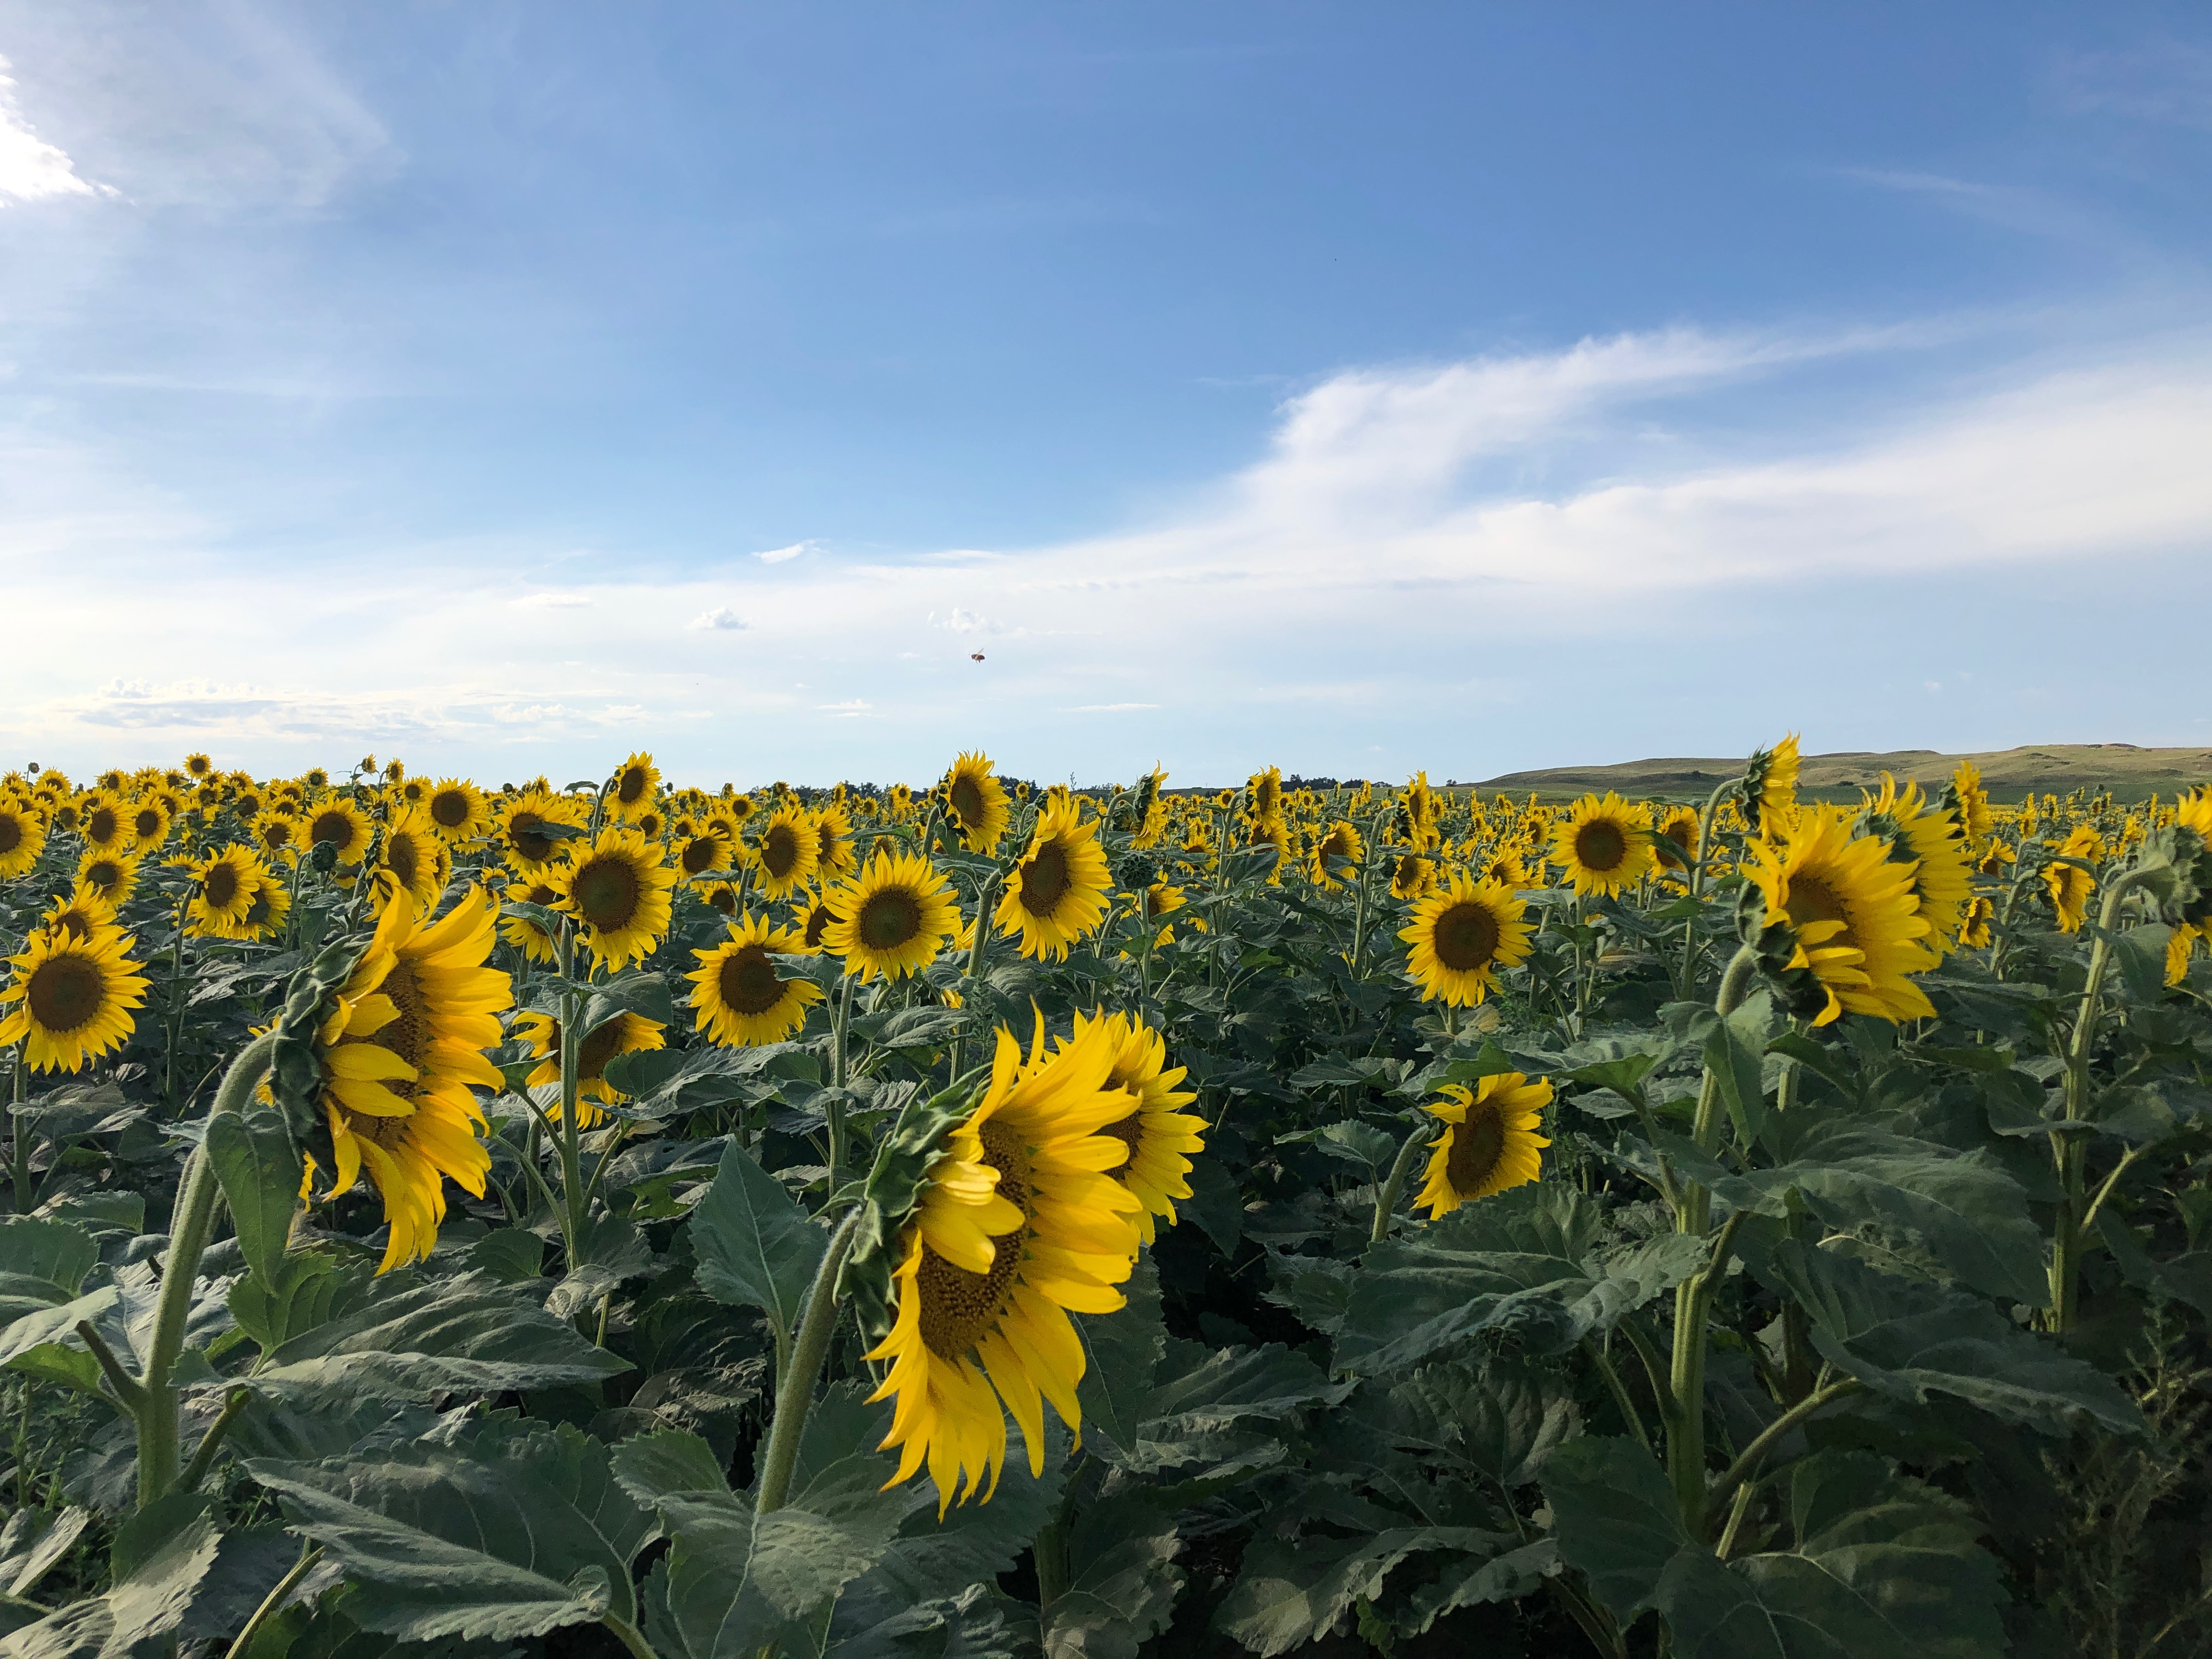 Morning Ag News, March 17, 2022: Sunflower prices soar ahead of the 2022 growing season